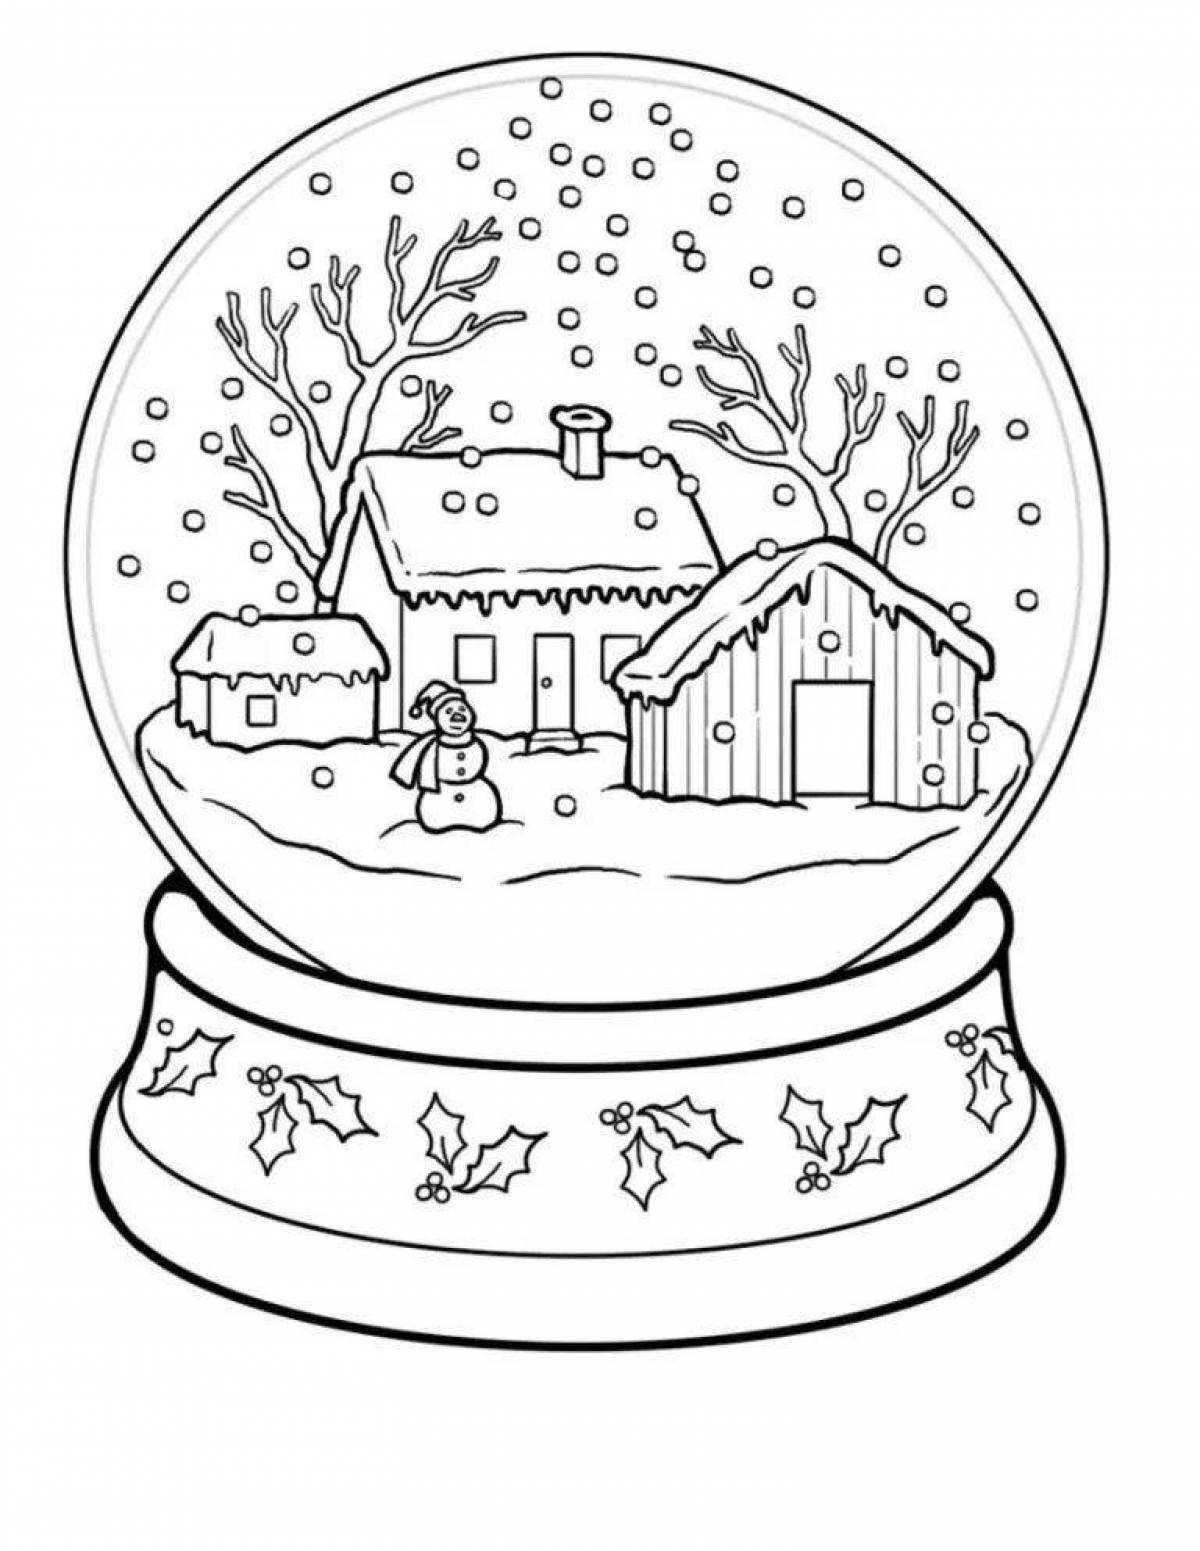 Great winter coloring book for 8 year olds